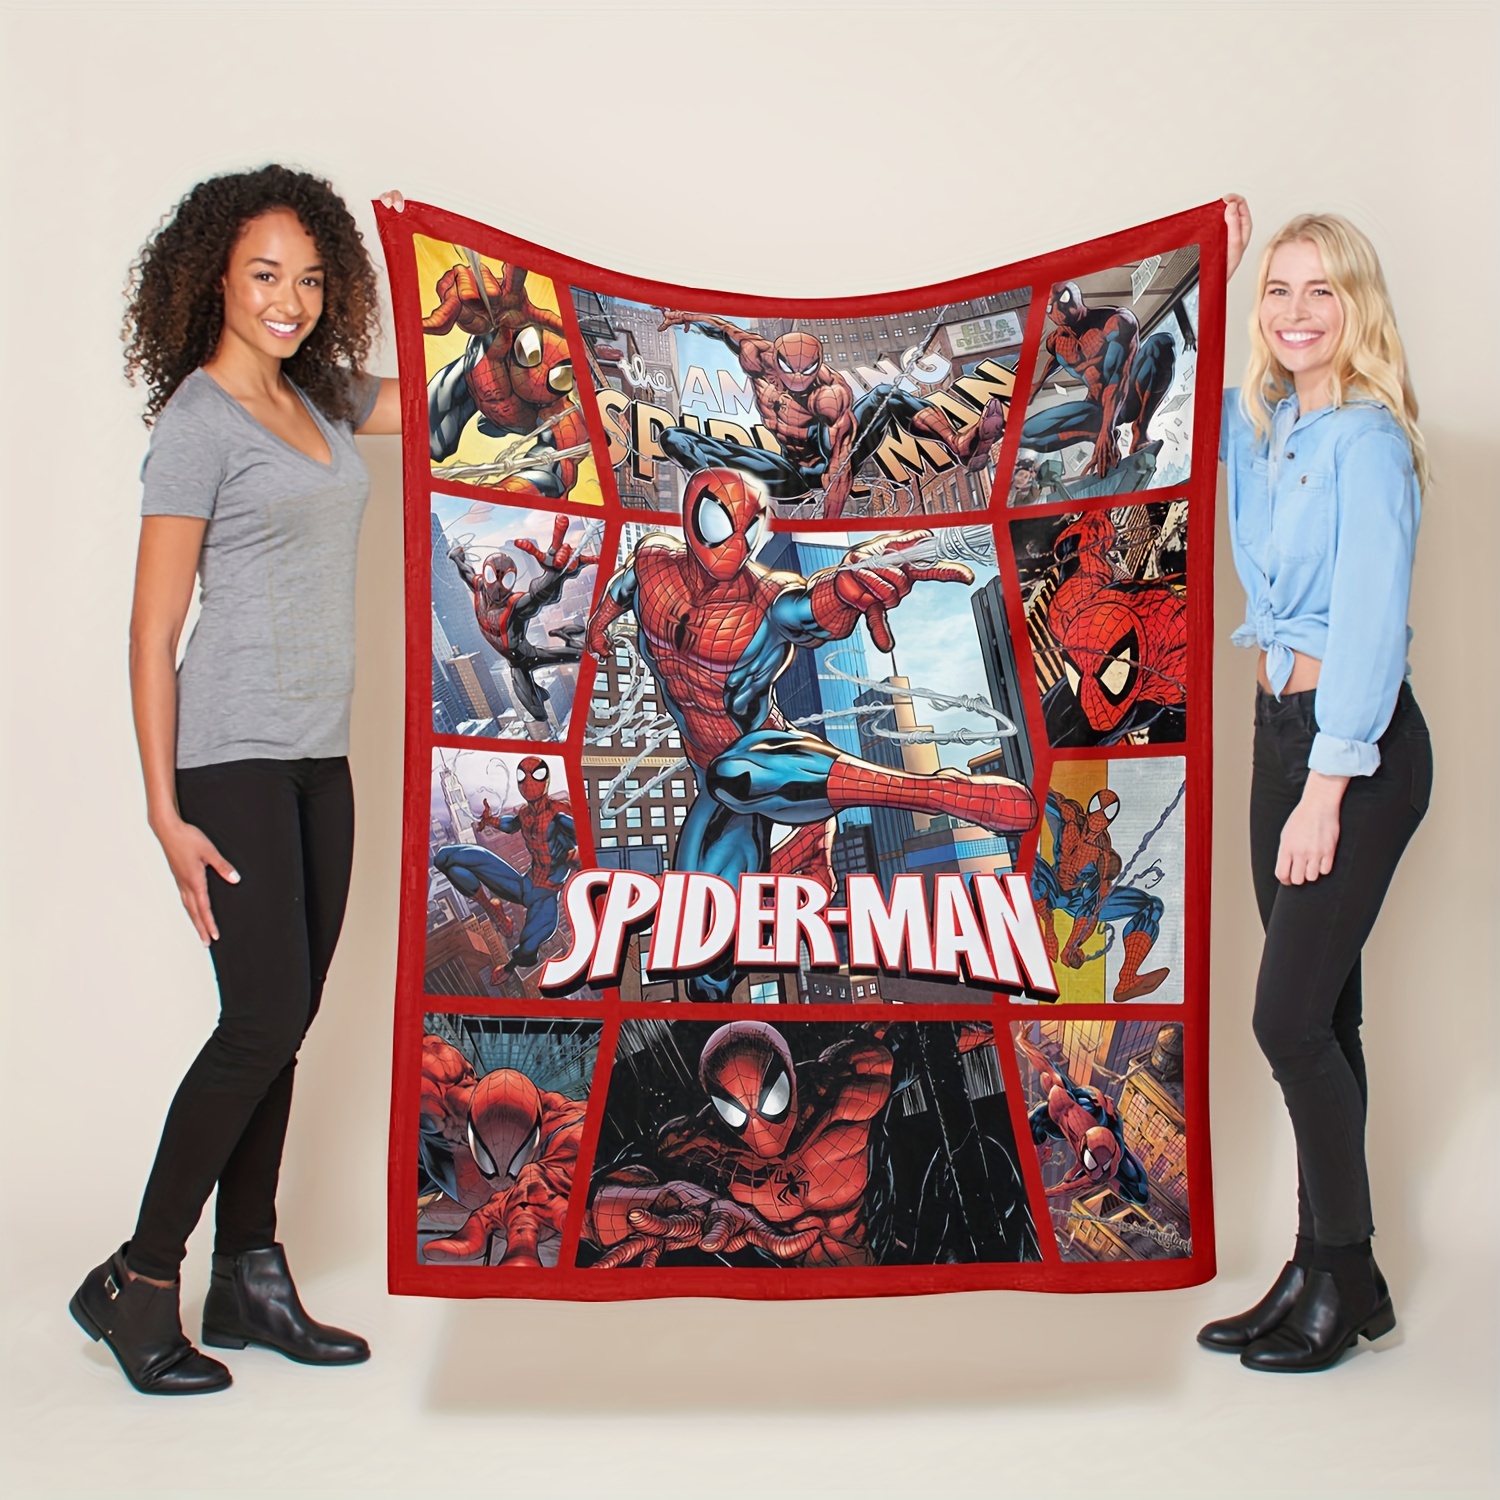 

Superhero Spider-man Flannel Throw Blanket - Soft, Warm & Cozy For Couch, Bed, Office - Versatile All-season Gift